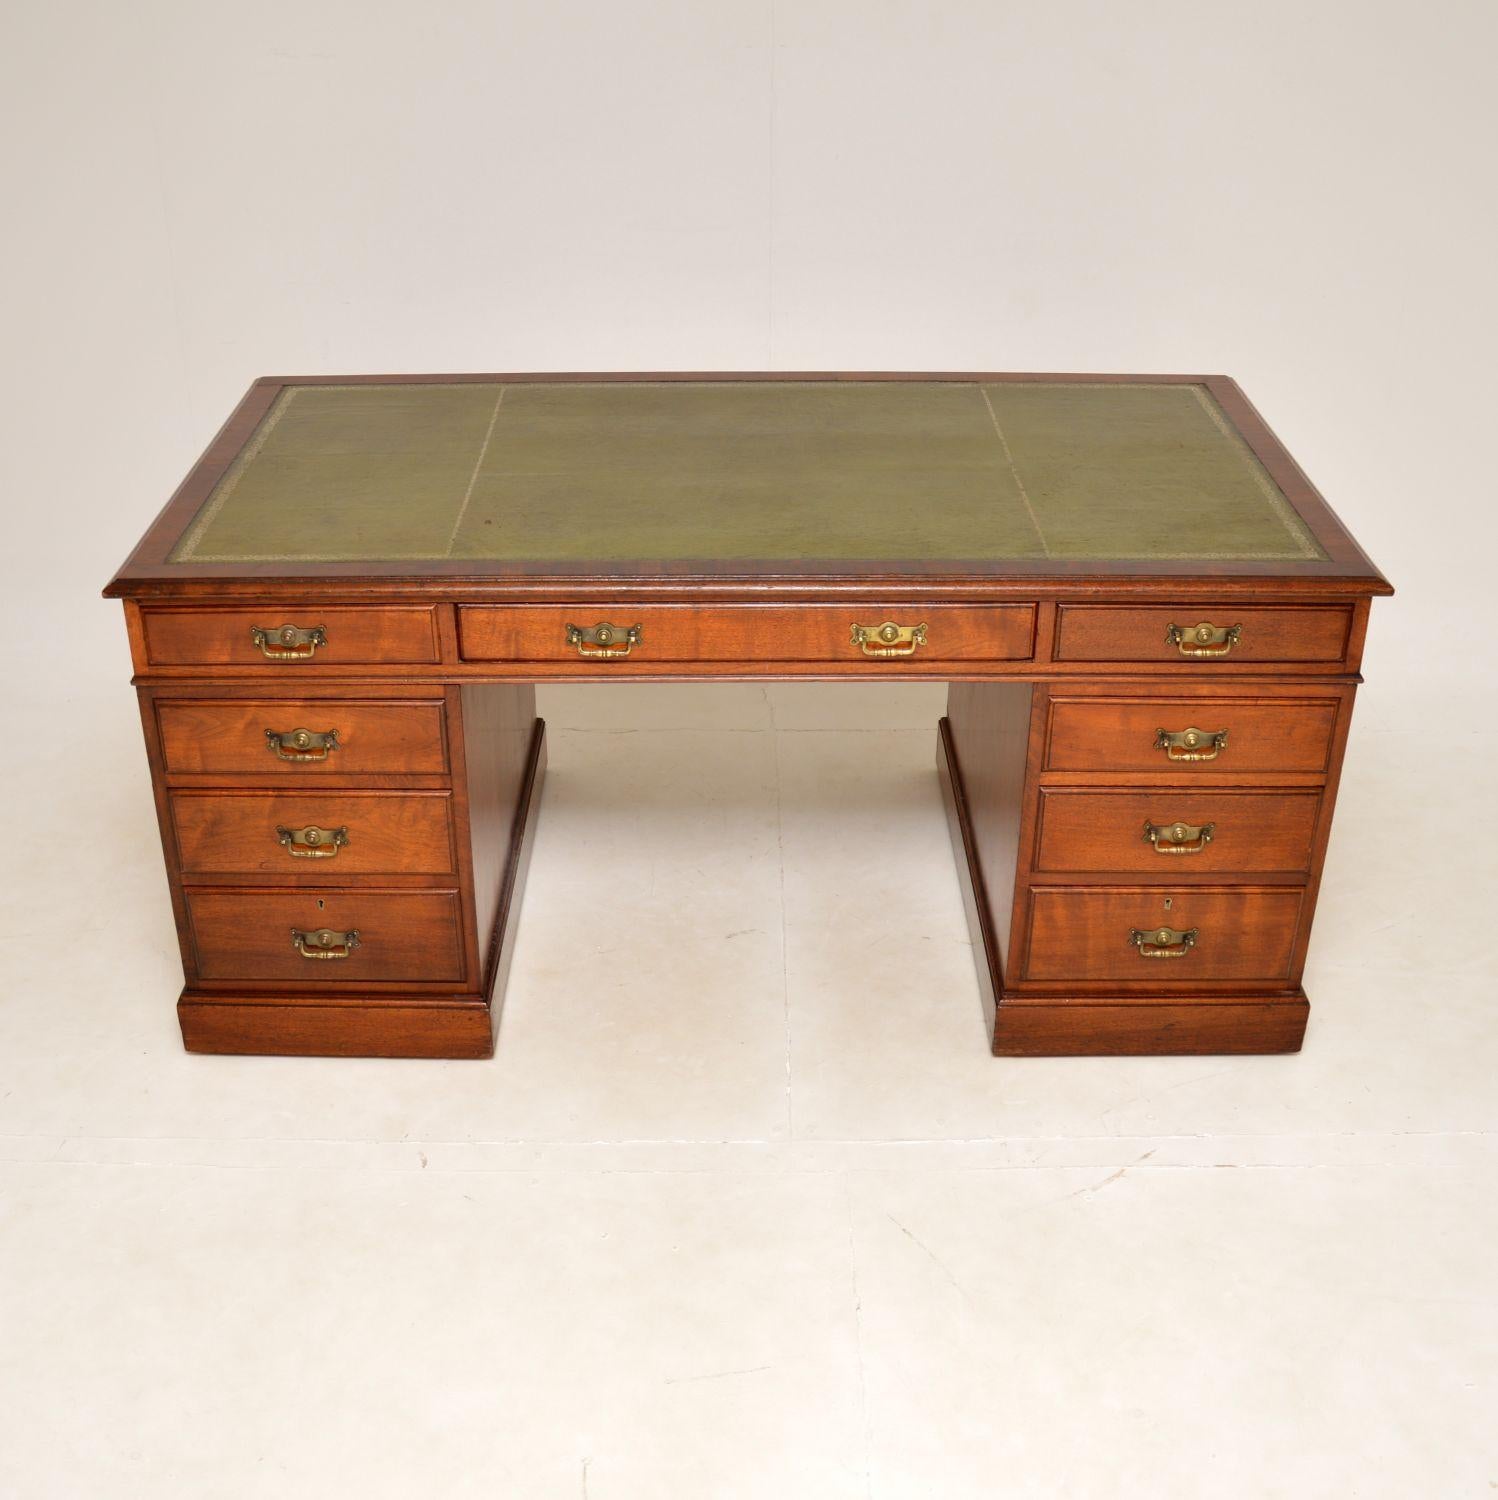 A fantastic antique Victorian partners desk in solid walnut. This was made in England, it dates from around 1880-1900.

The quality is outstanding, this is a large and impressive item. The inset green leather top has a gorgeous colour tone and is